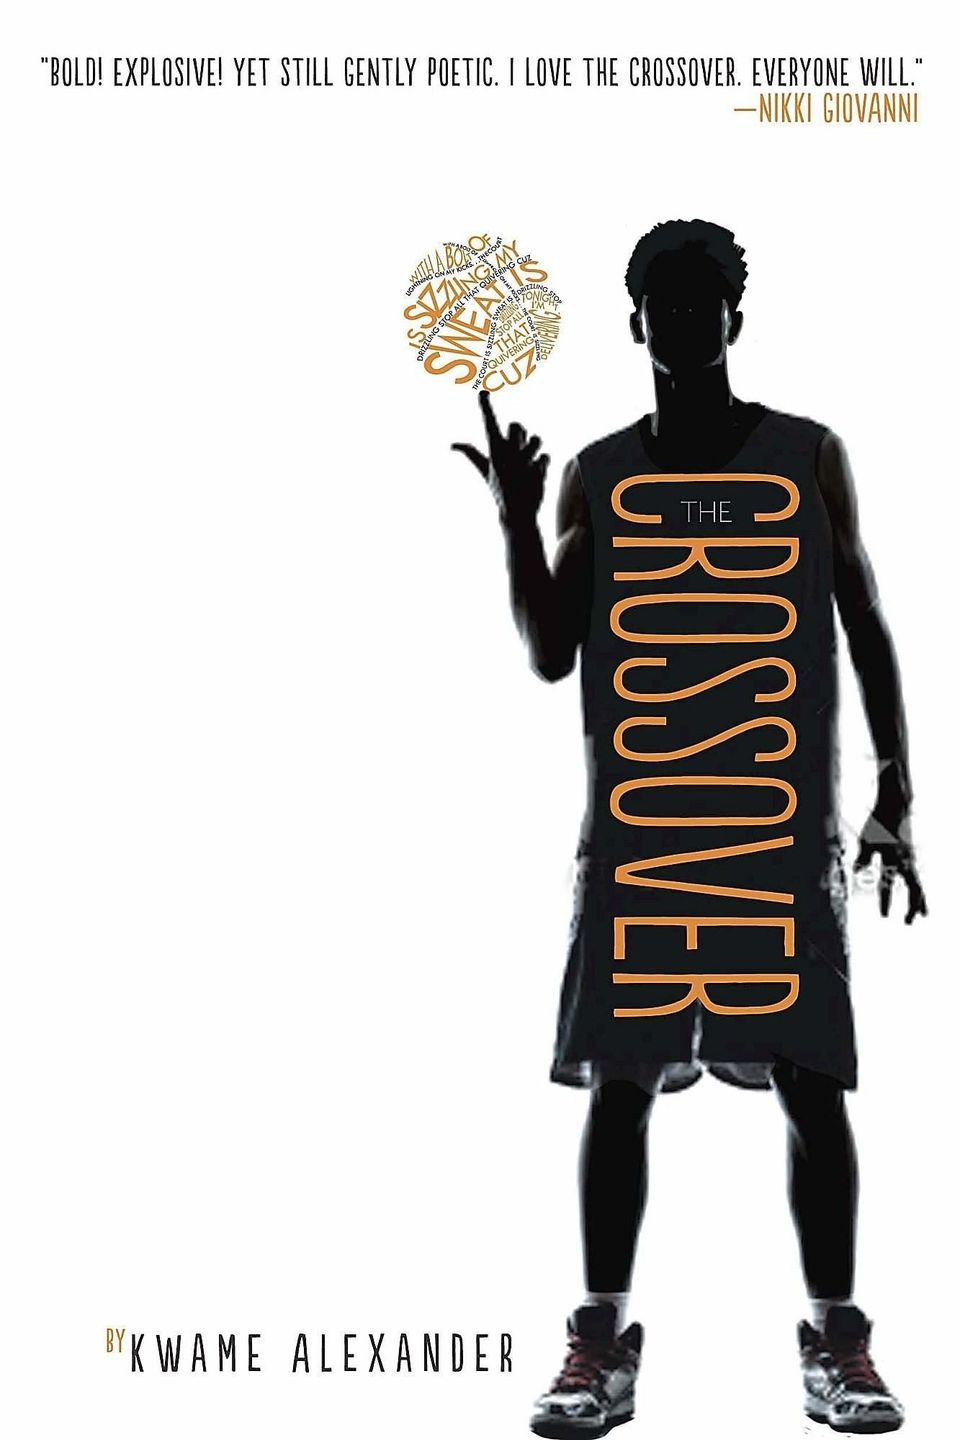 'The Crossover' by Kwame Alexander (HMH) 